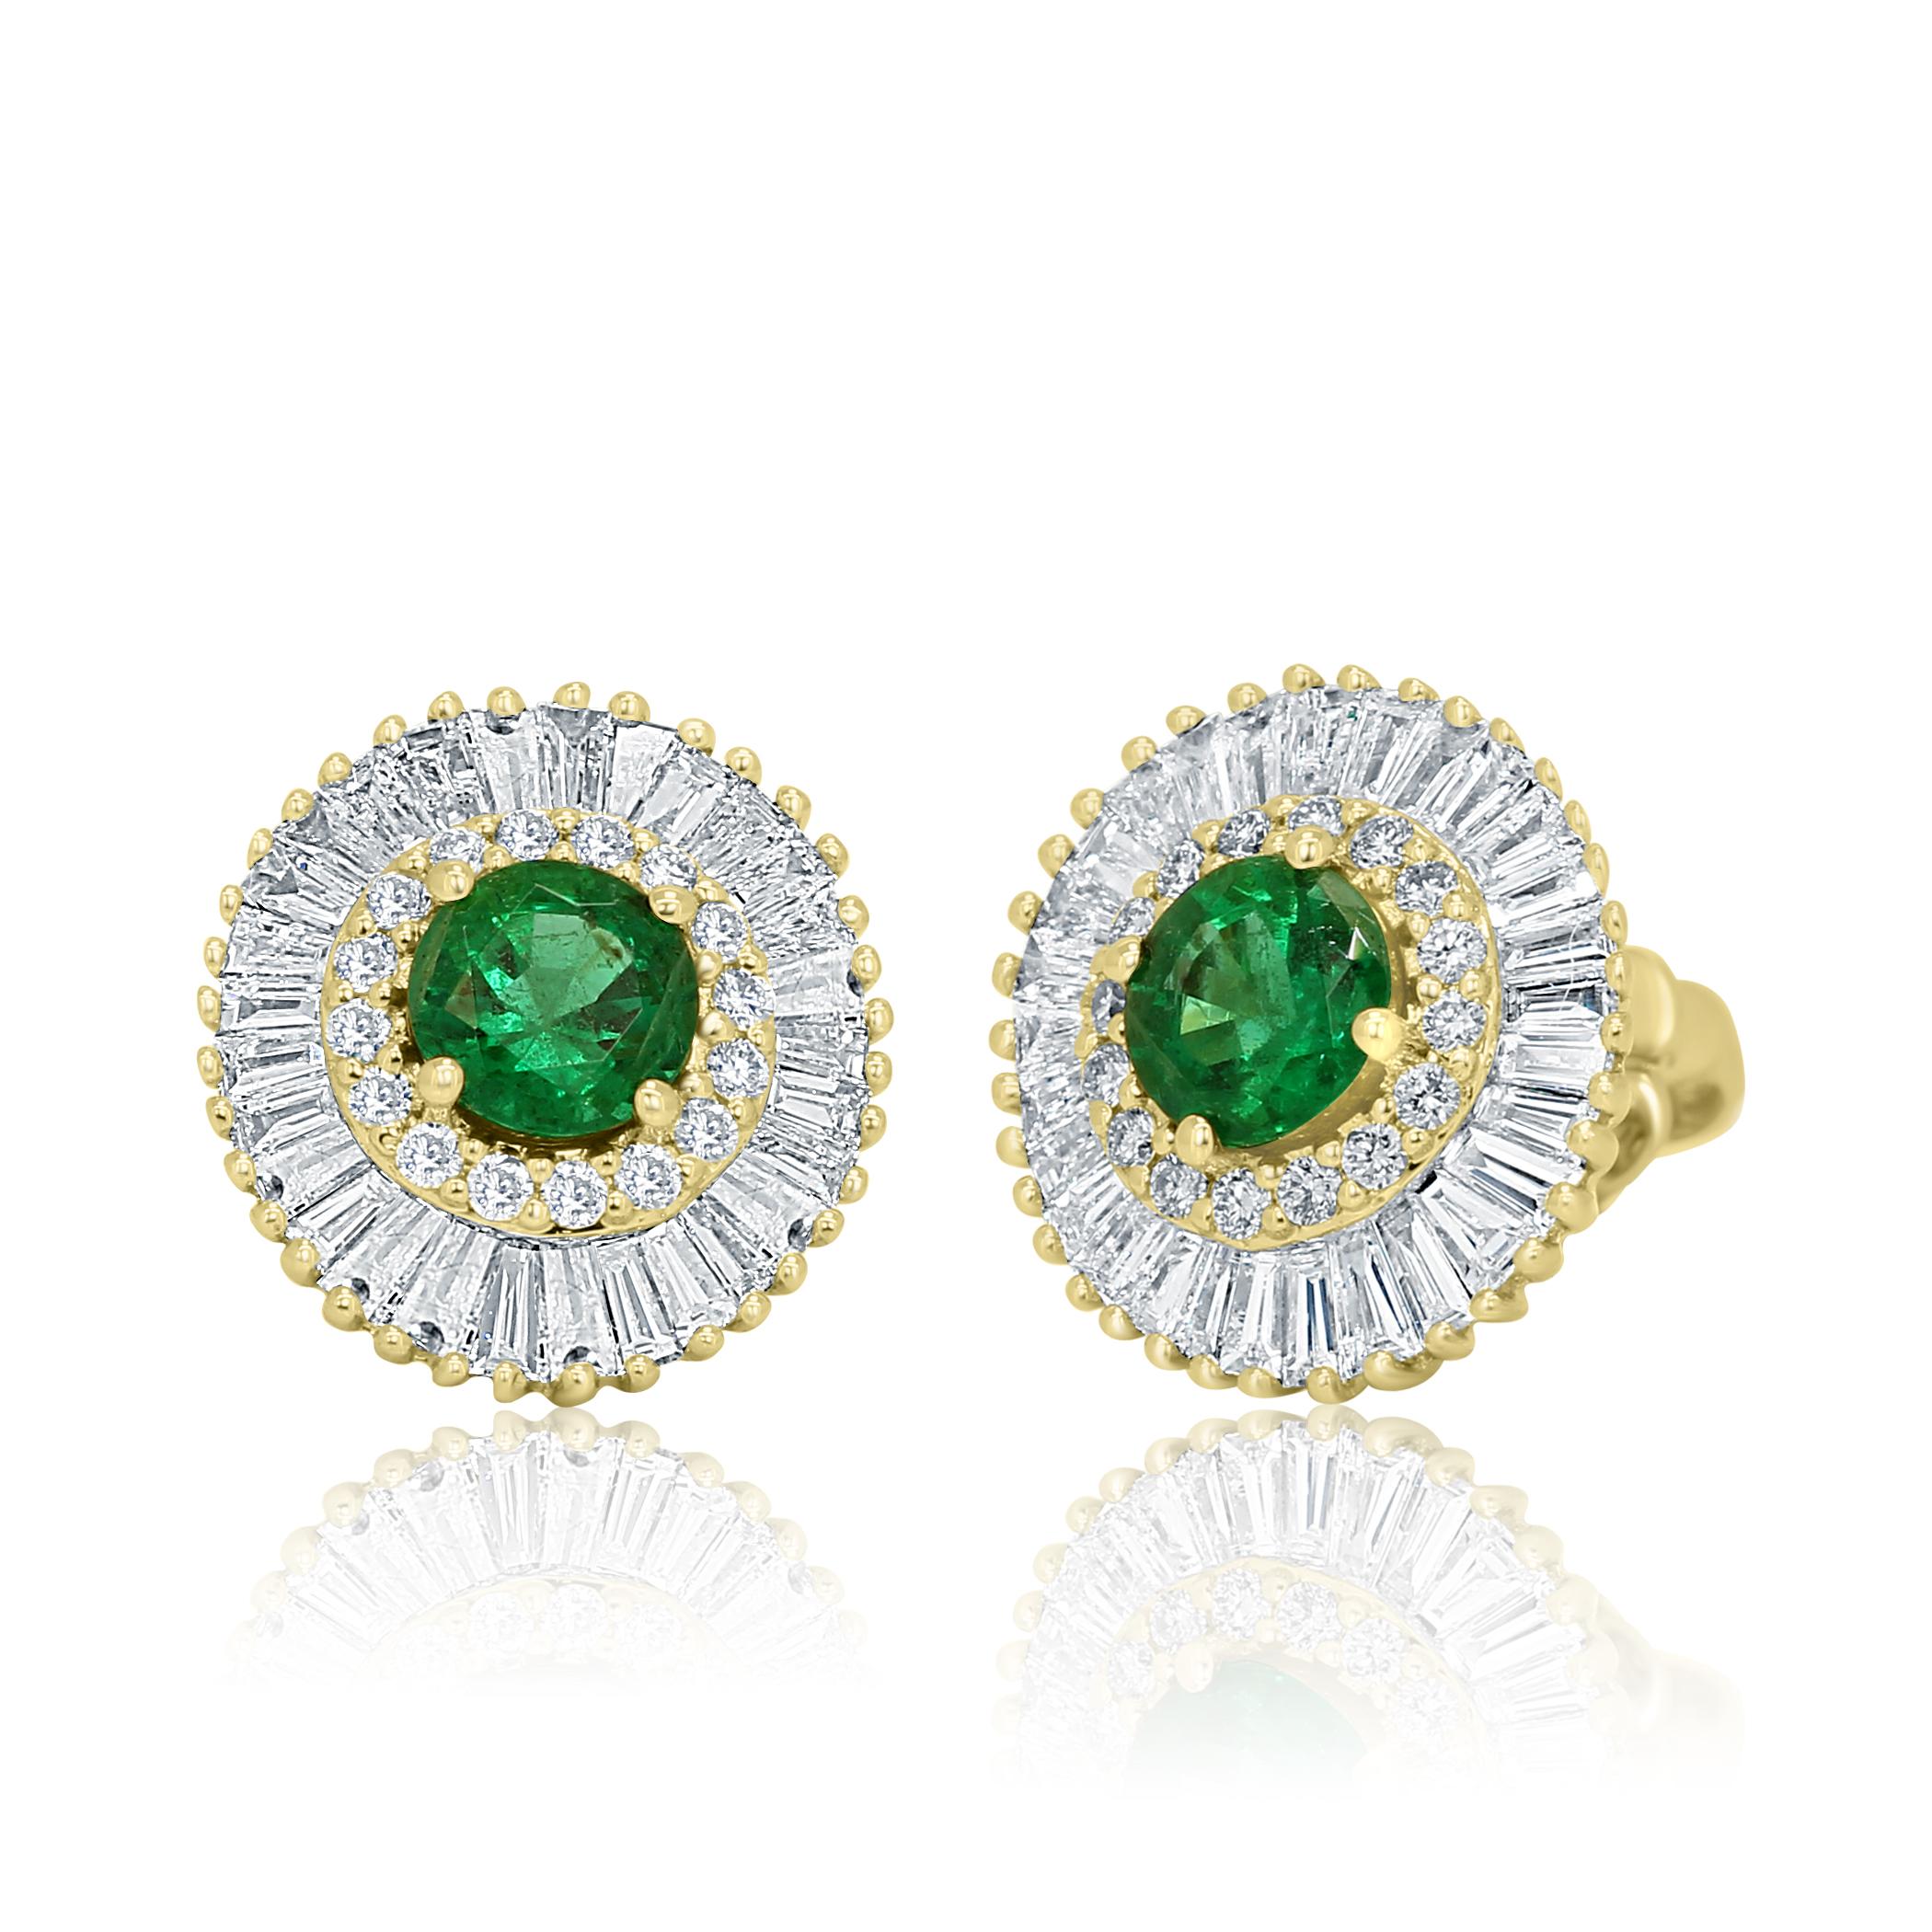 Art Deco Style Gorgeous Emerald Round 0.90 Carat encircled in a Double Halo of White Round Diamonds 0.22 Carat and White Baguette Diamond 0.98 Carat in 14K Yellow Gold Stunning Ballerina Style Stud Earring.

Style available in different price